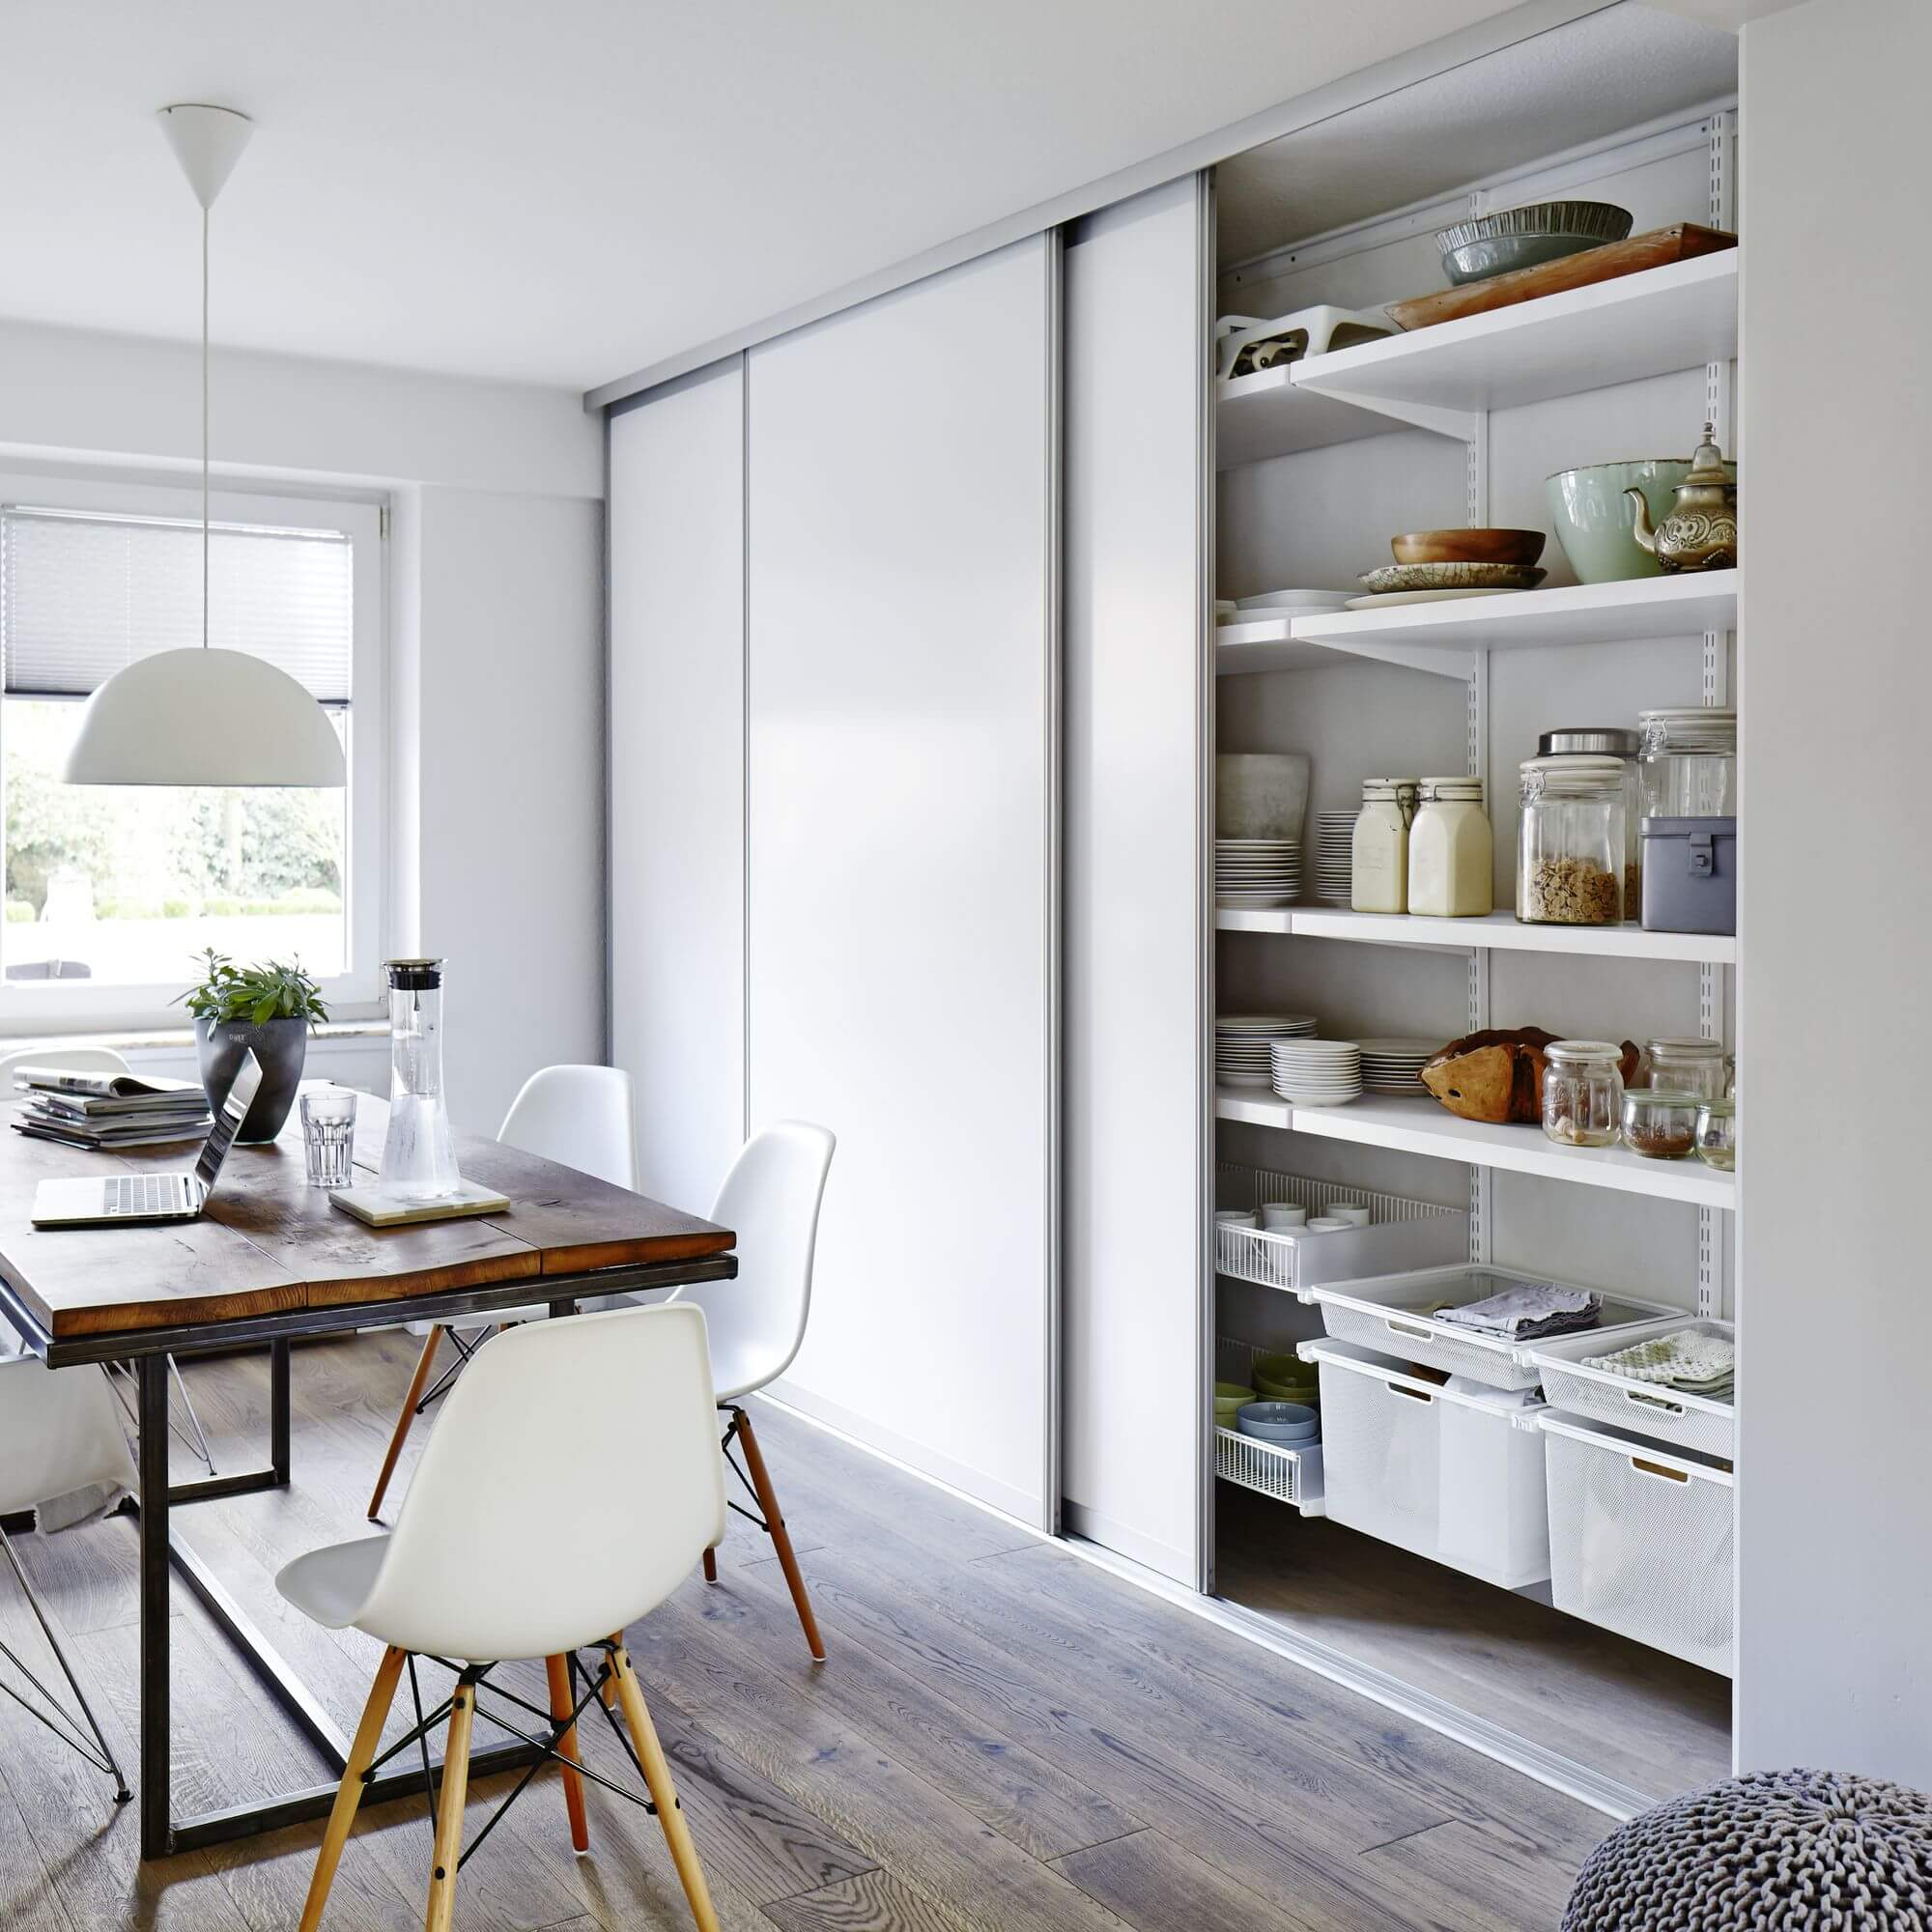 White Elfa pantry shelving with drawers, kitchen containers, pantry shelves and plates